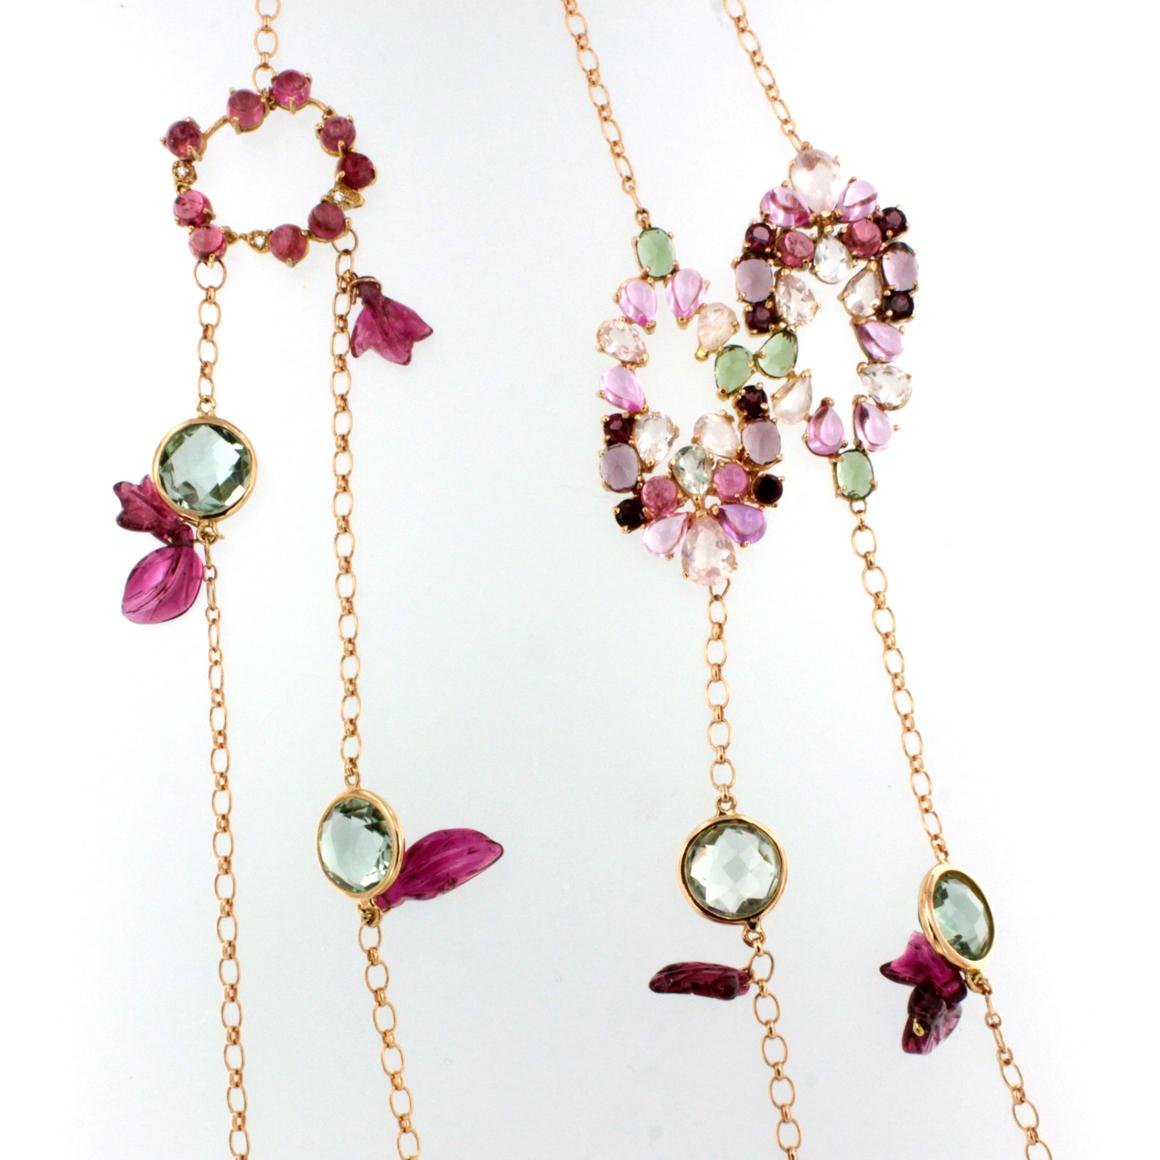 Modern Necklace in 18k rose gold with Pink Tourmaline (leaf cut, size:10x15 mm, round mm 5), Prasiolite (round cut, size: 12mm) and white Diamonds cts 0.4 VS colour G/H. 
g.75.90

All Stanoppi Jewelry is new and has never been previously owned or